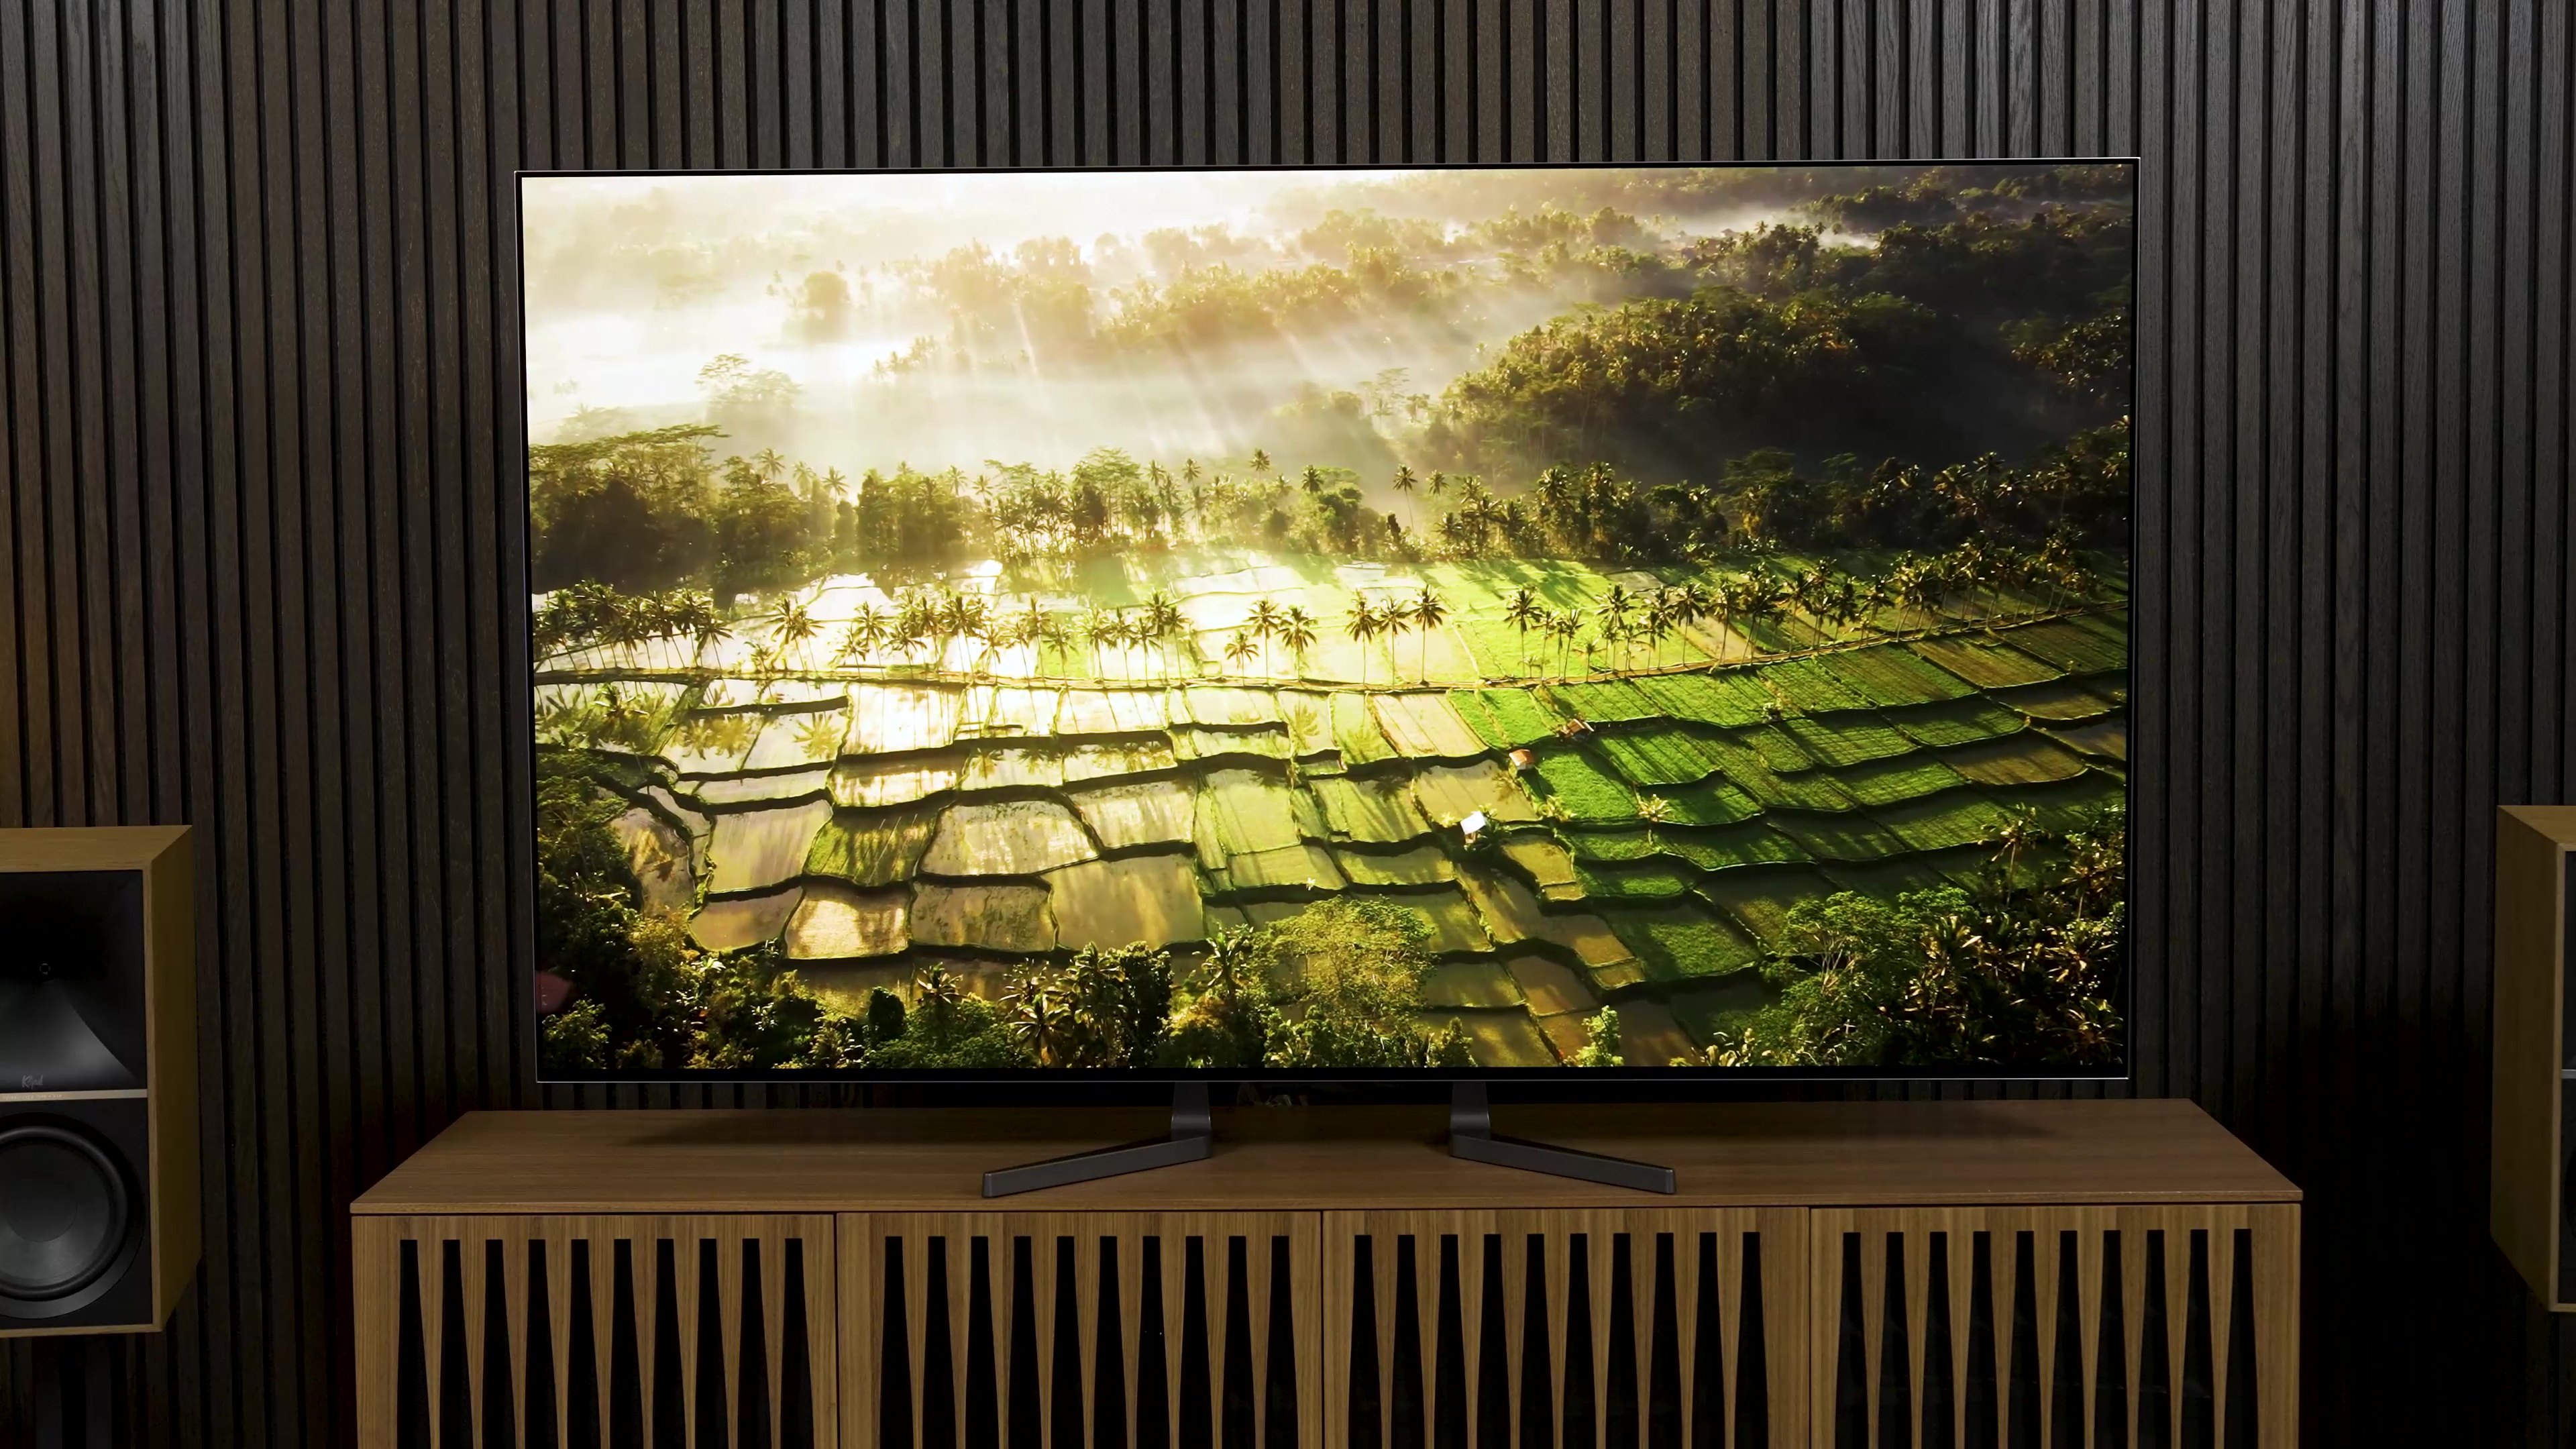 LG G3 OLED review: TV doesn't get better than this